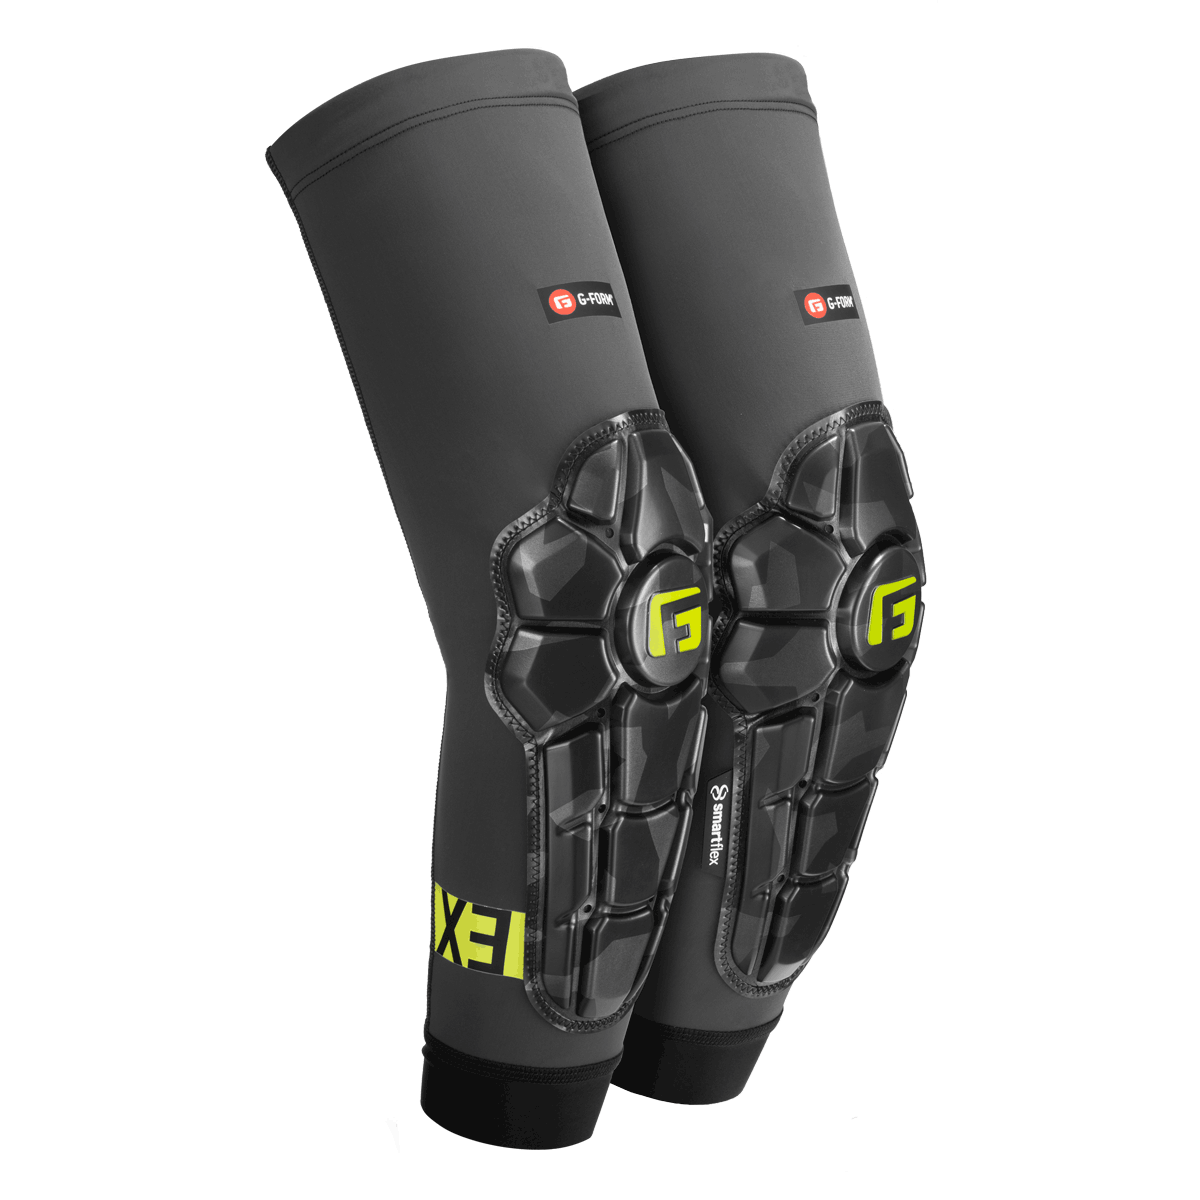 Pro-X3 Youth Adult Elbow Guards Knee Pads Mountain BIking Ski Snowboard, Elbow protection and compression sleeve